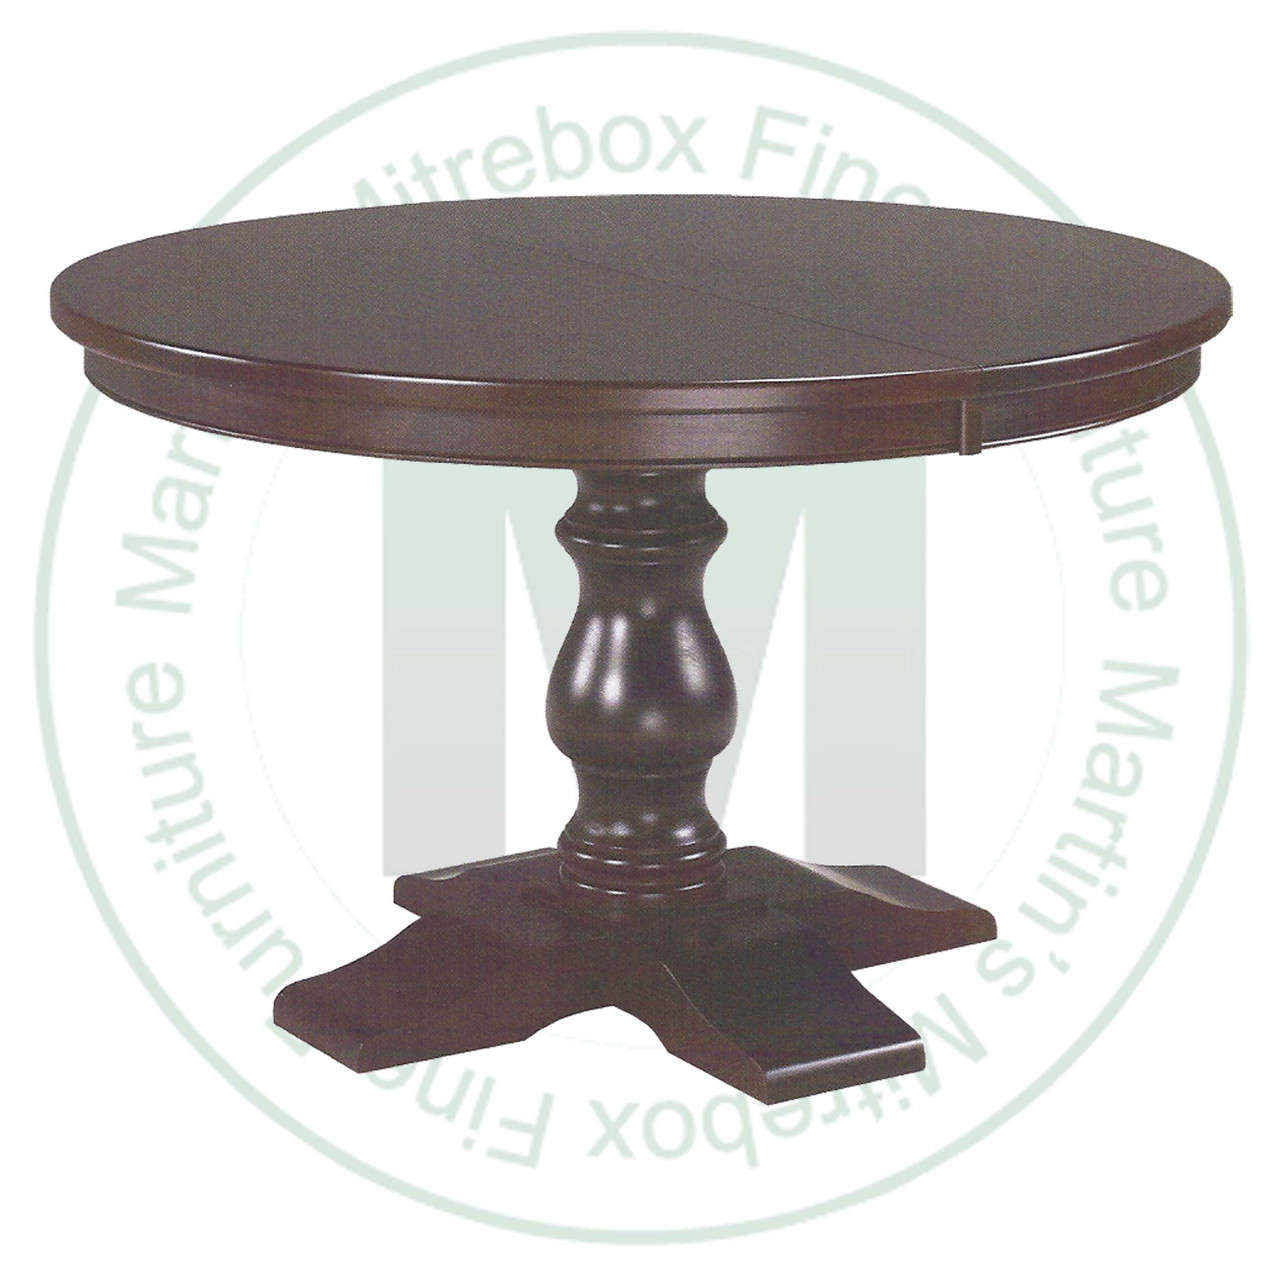 Wormy Maple Savannah Single Pedestal Table 60''D x 60''W x 30''H With 2 - 12'' Leaves Table. Table Has 1'' Thick Top.